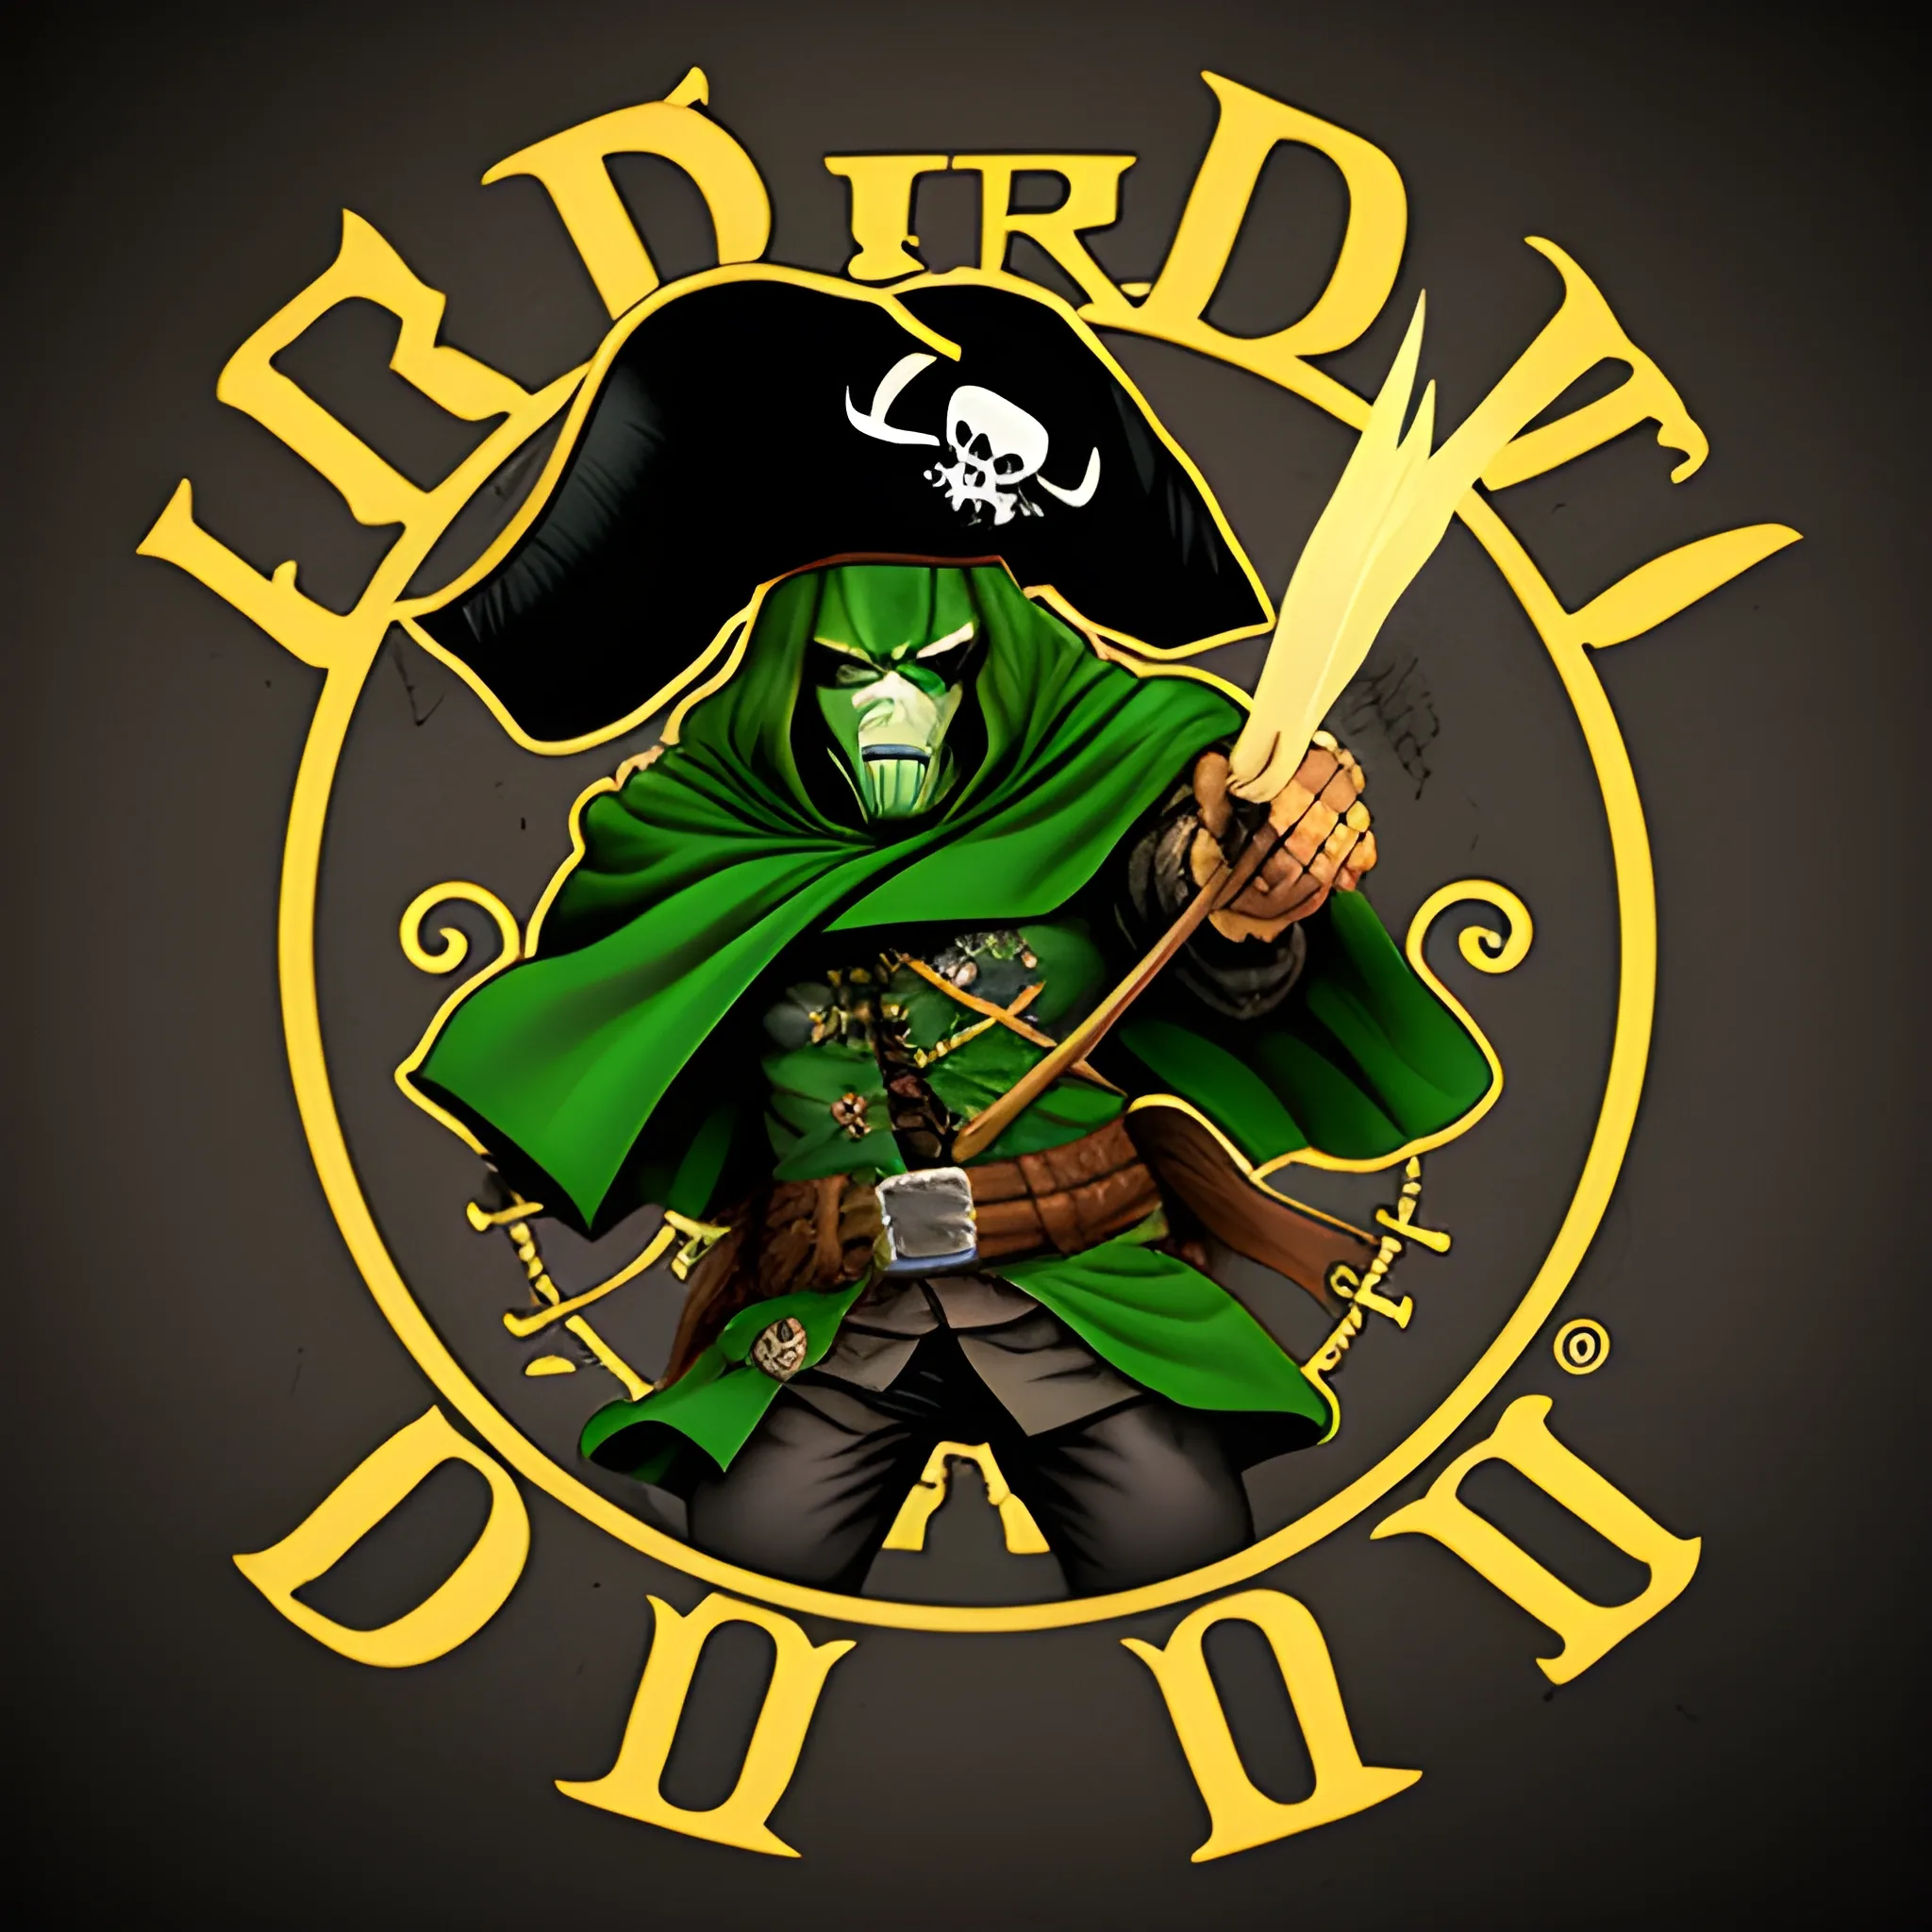 DR DOOM PIRATE LOGO WITH WING IN THE BACK